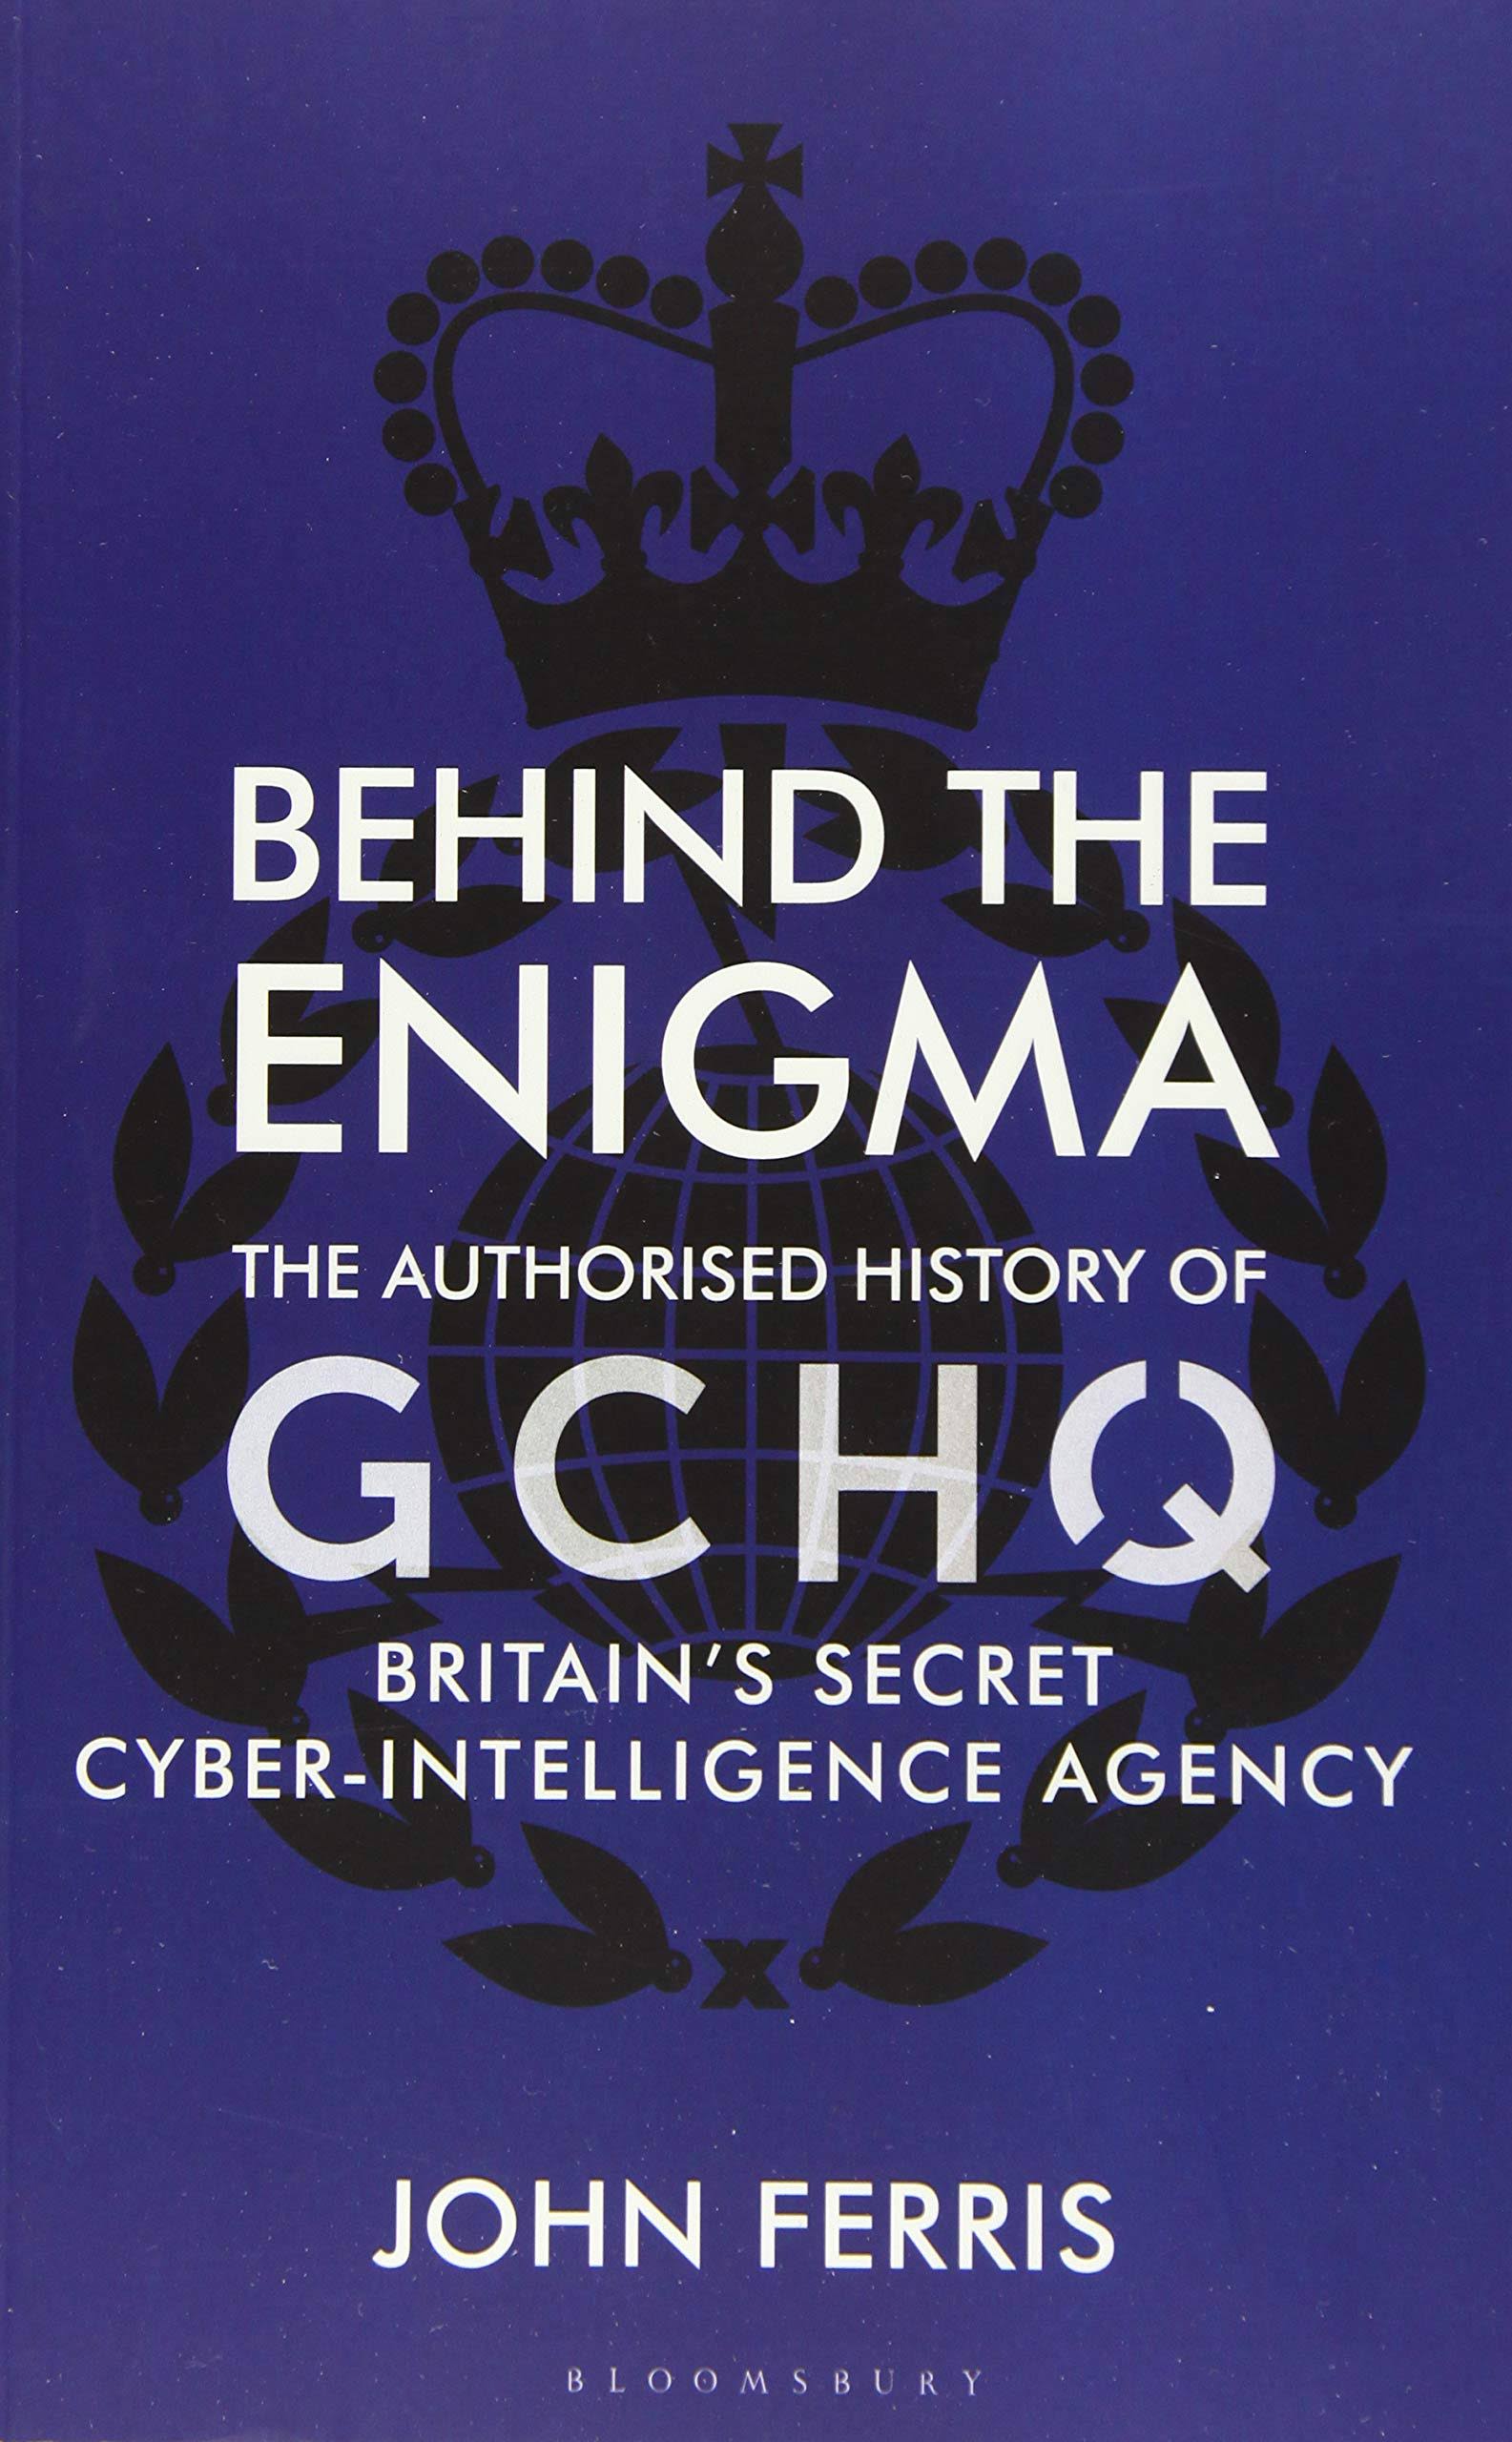 Behind the Enigma: The Authorised History of GCHQ, Britain's Secret Cyber-Intelligence Agency [Book]